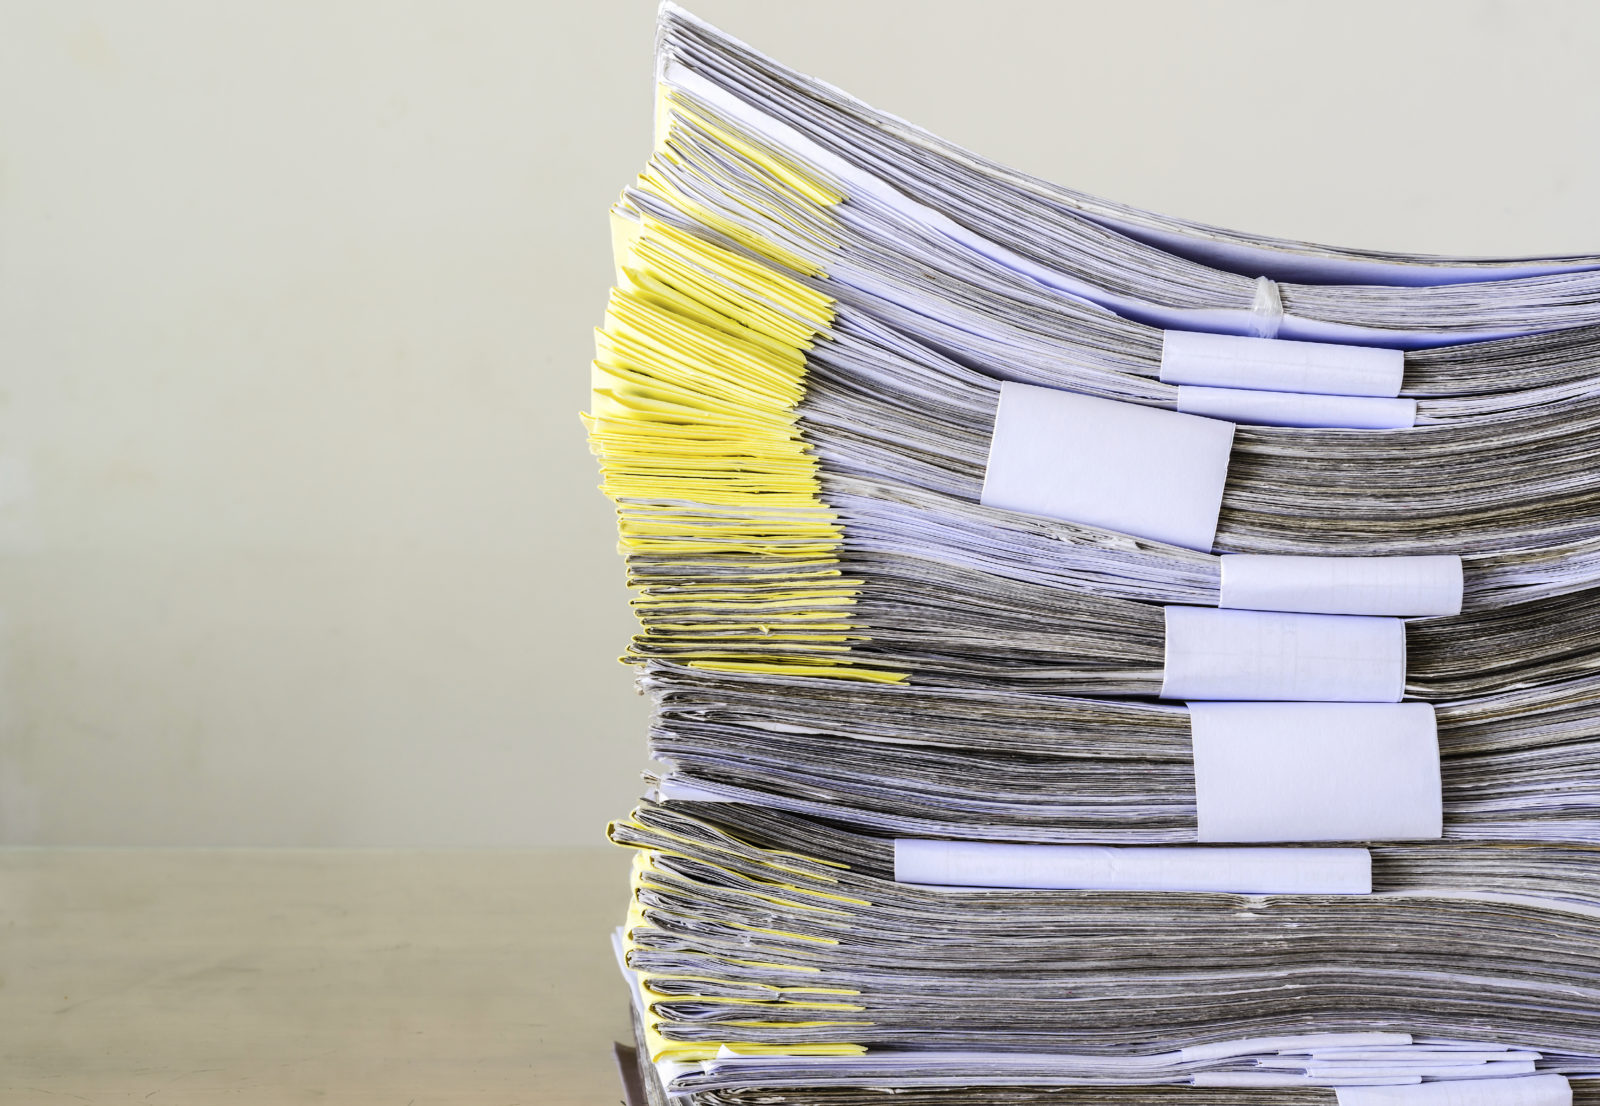 The Document Retention Policy Critical to Every SMB